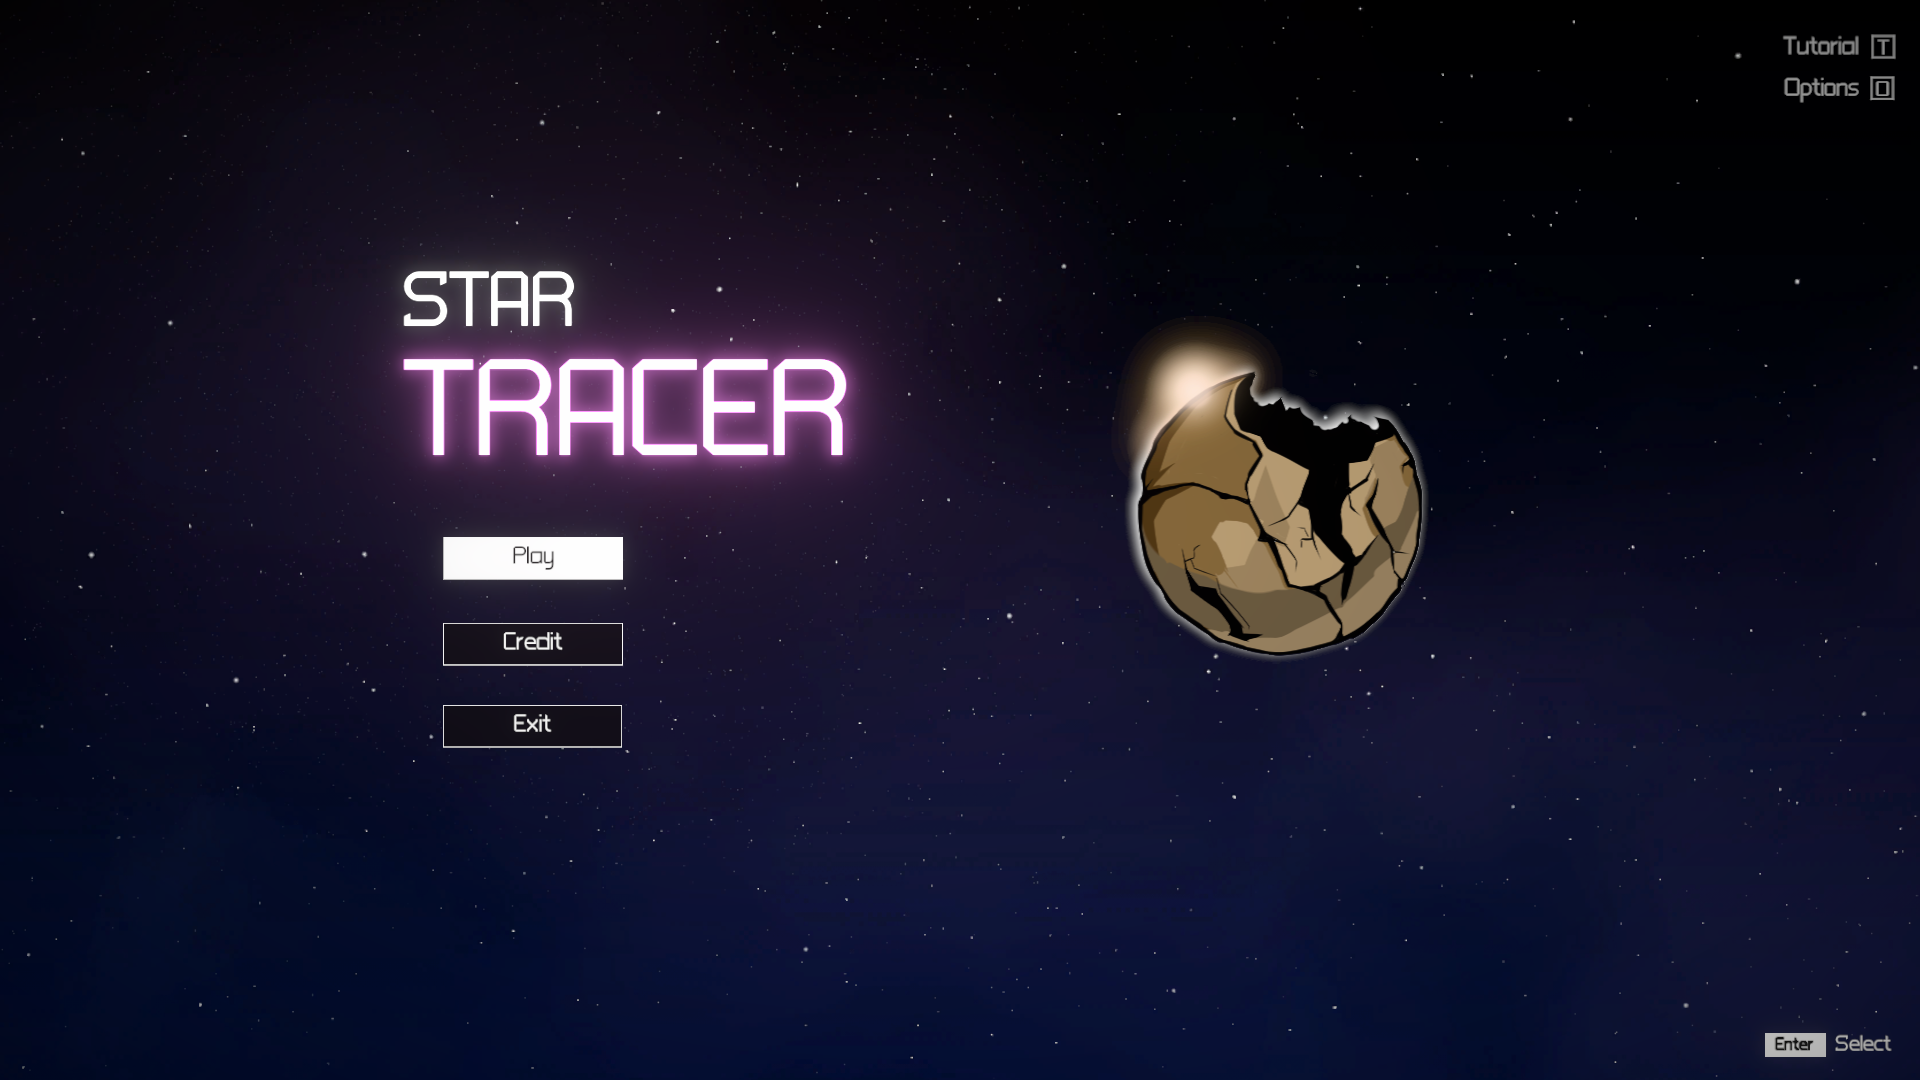 Star Tracer